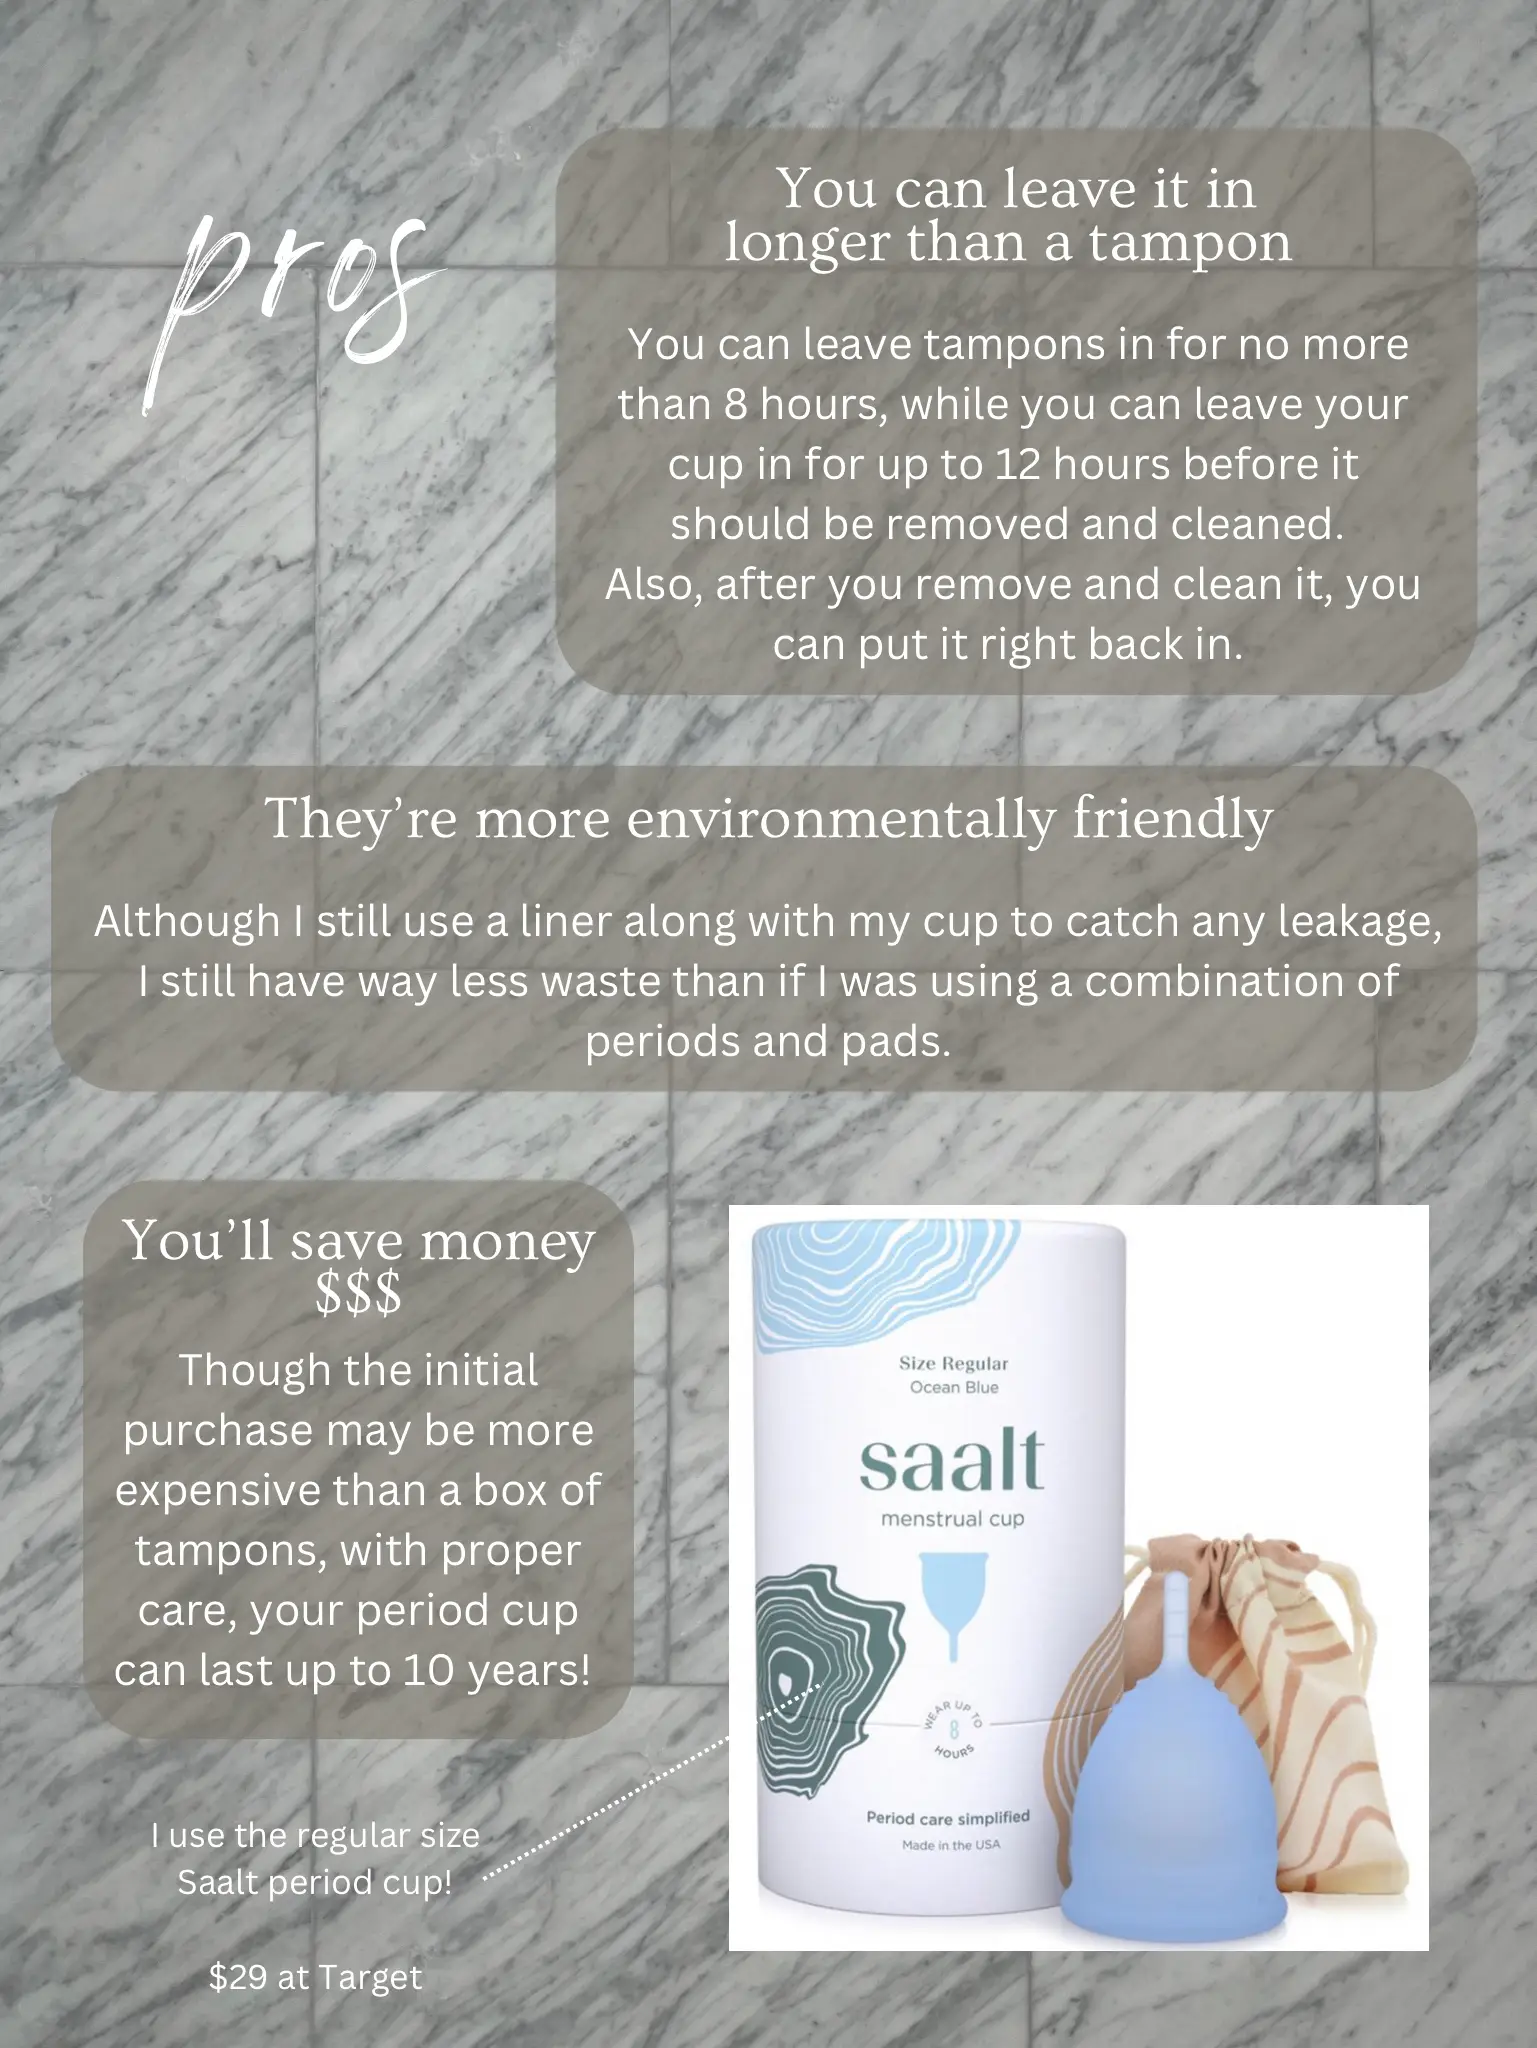 Saalt  Period Care Simplified on X: Saalt period underwear keeps you dry  by instantly pulling moisture down and away from your body. Have a period,  don't feel it.   /